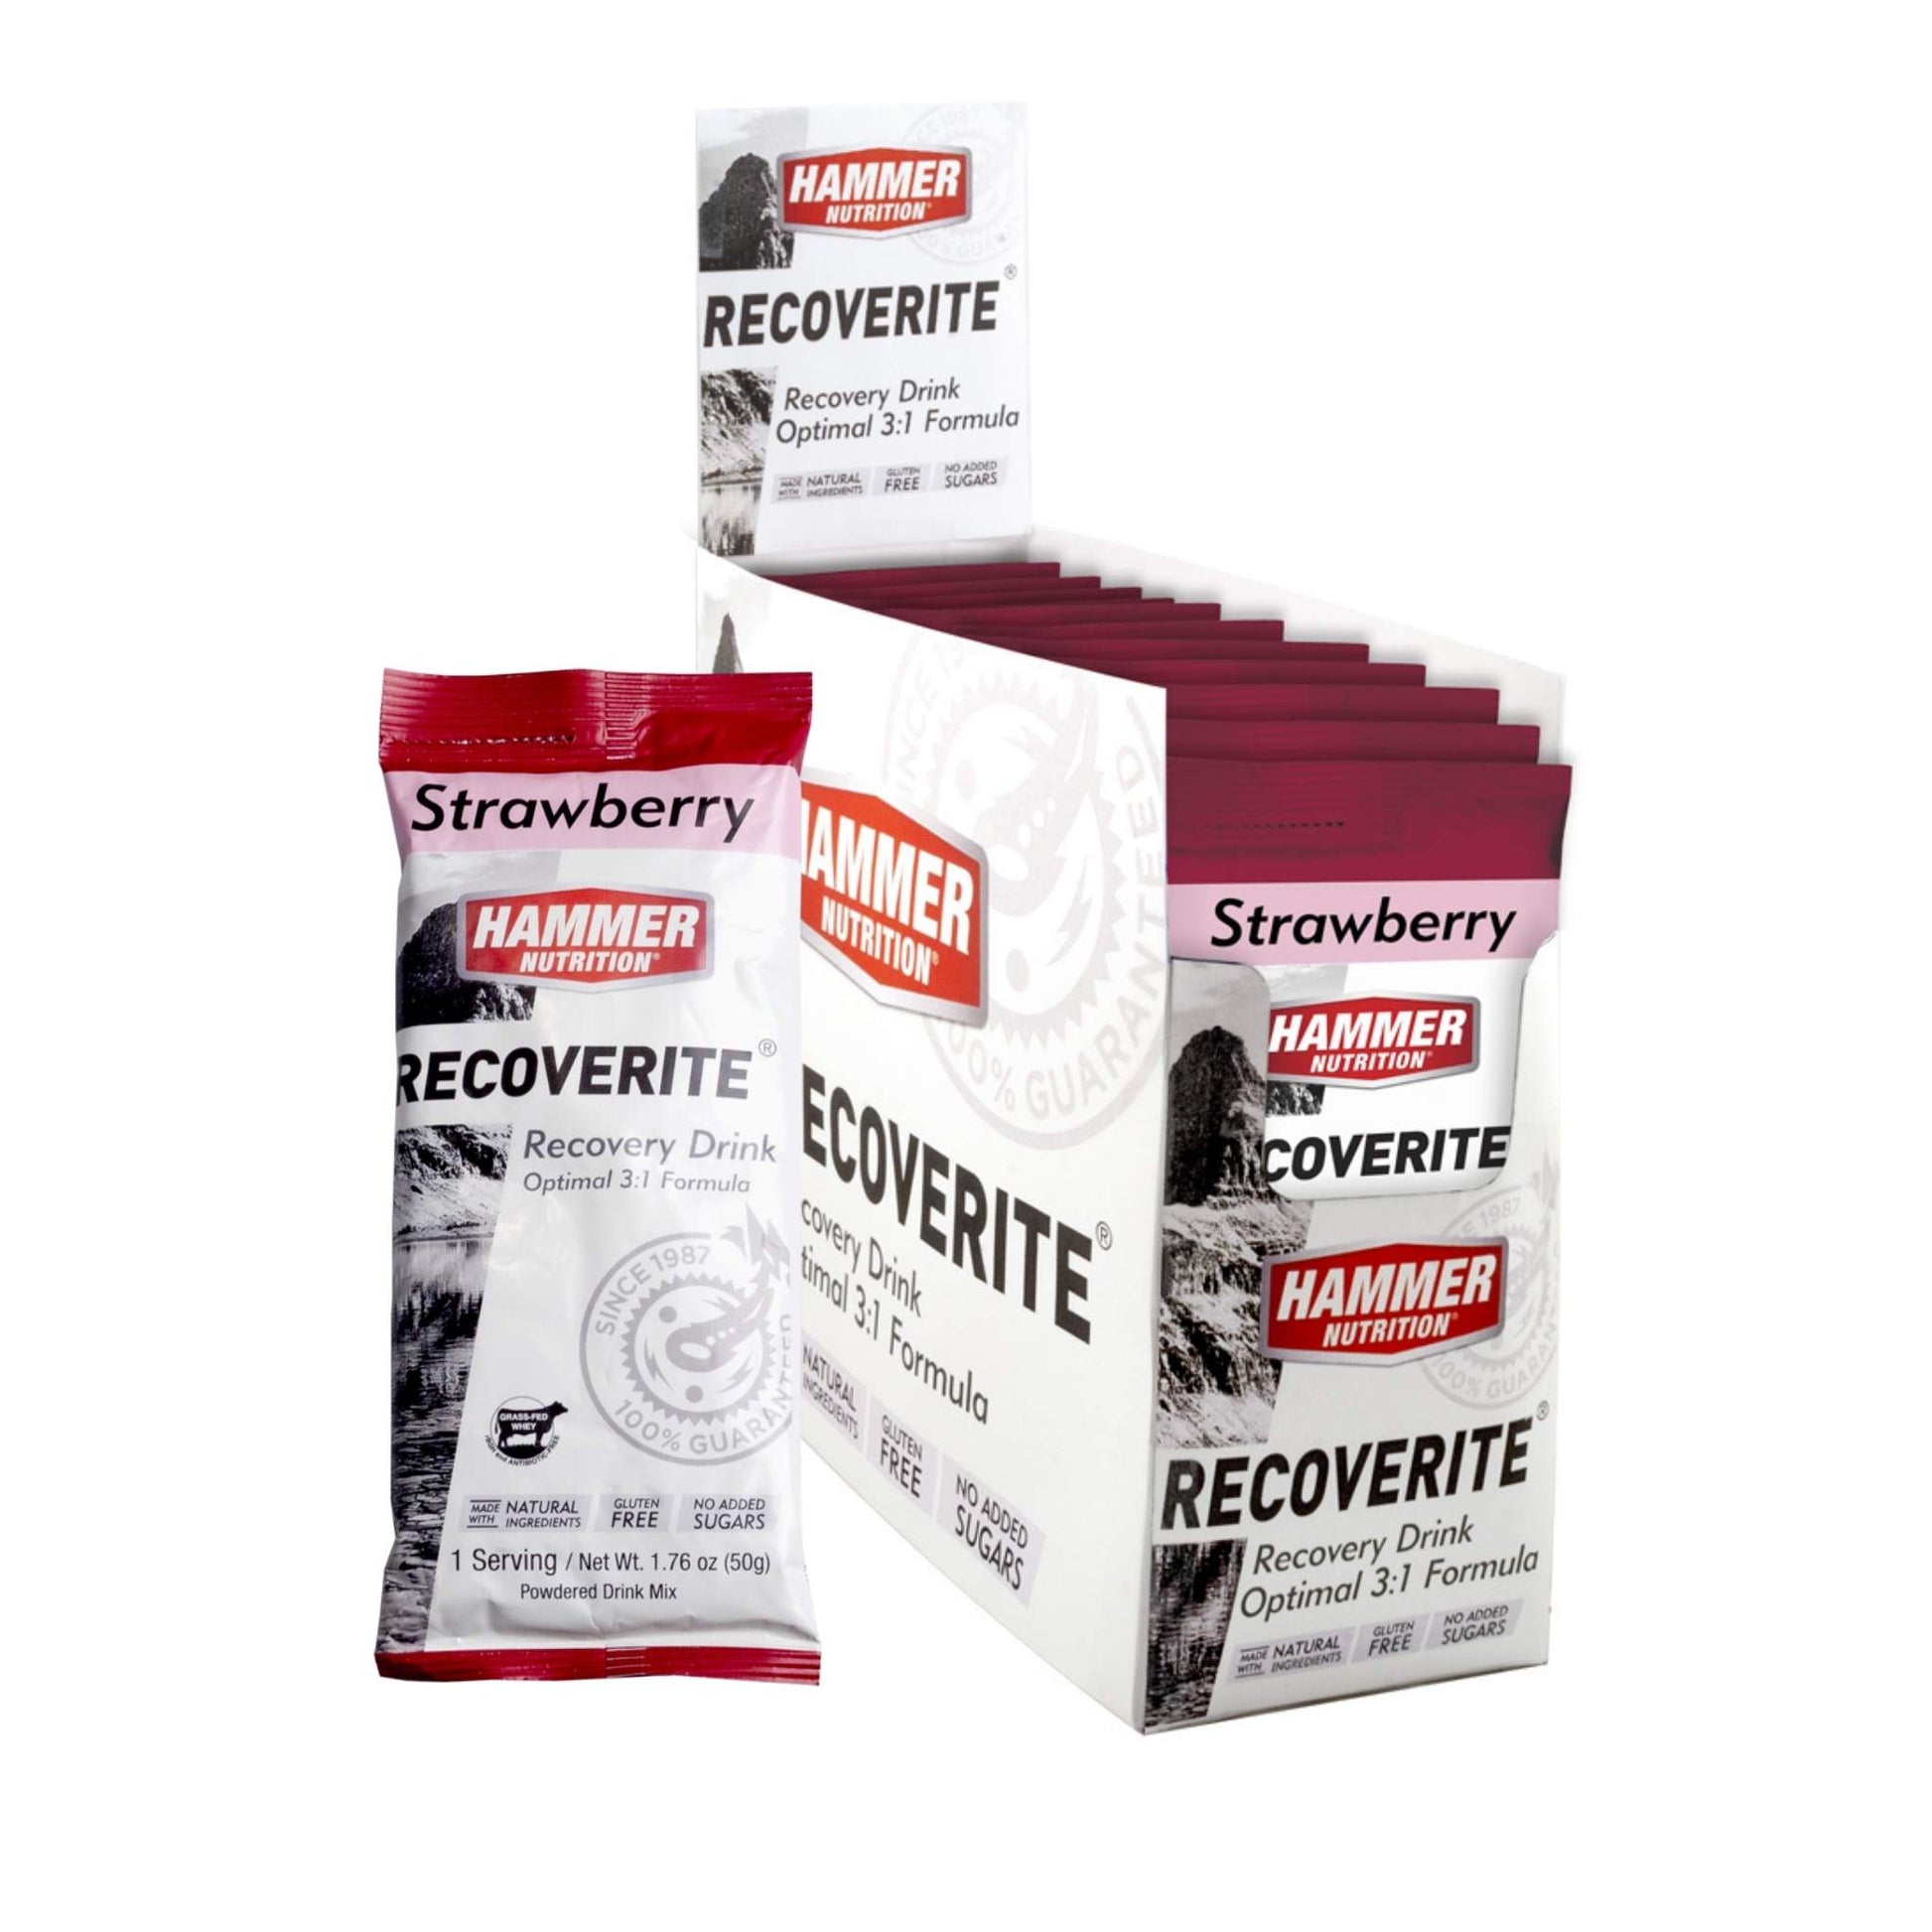 Hammer Nutrition - Recoverite, Strawberry, Box of 12 Servings, Shown with packaging, Team Perfect